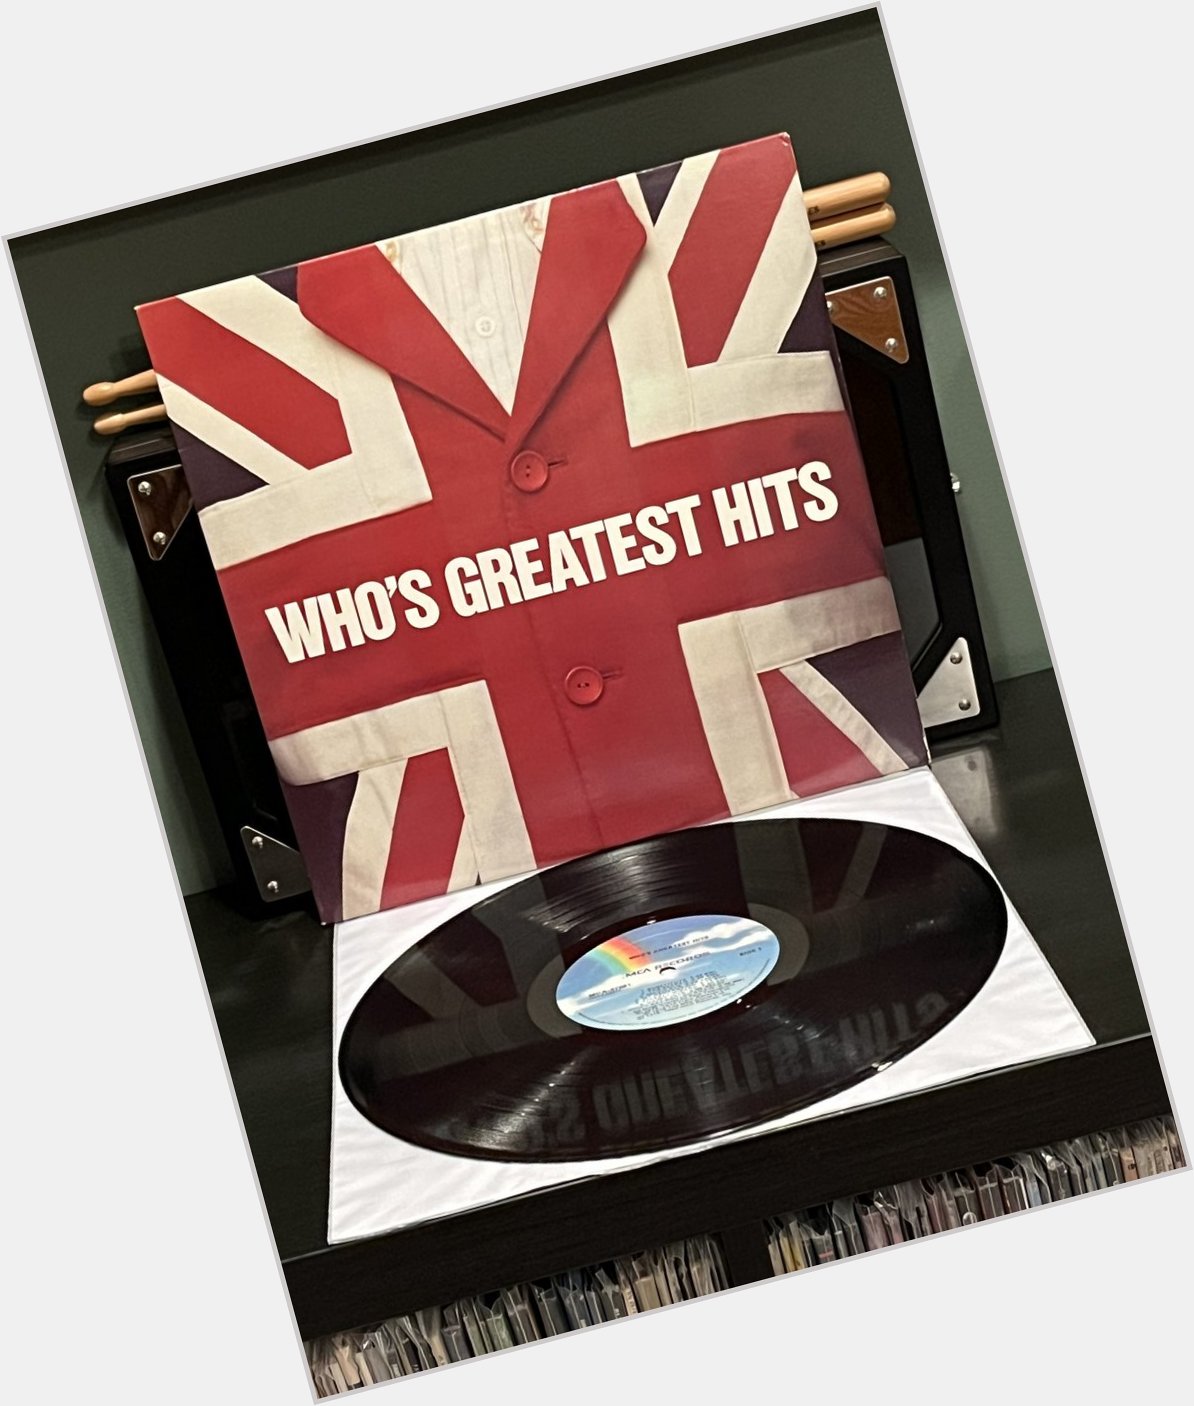 The Who - Who s Greatest Hits
Happy 79th birthday to Roger Daltrey 